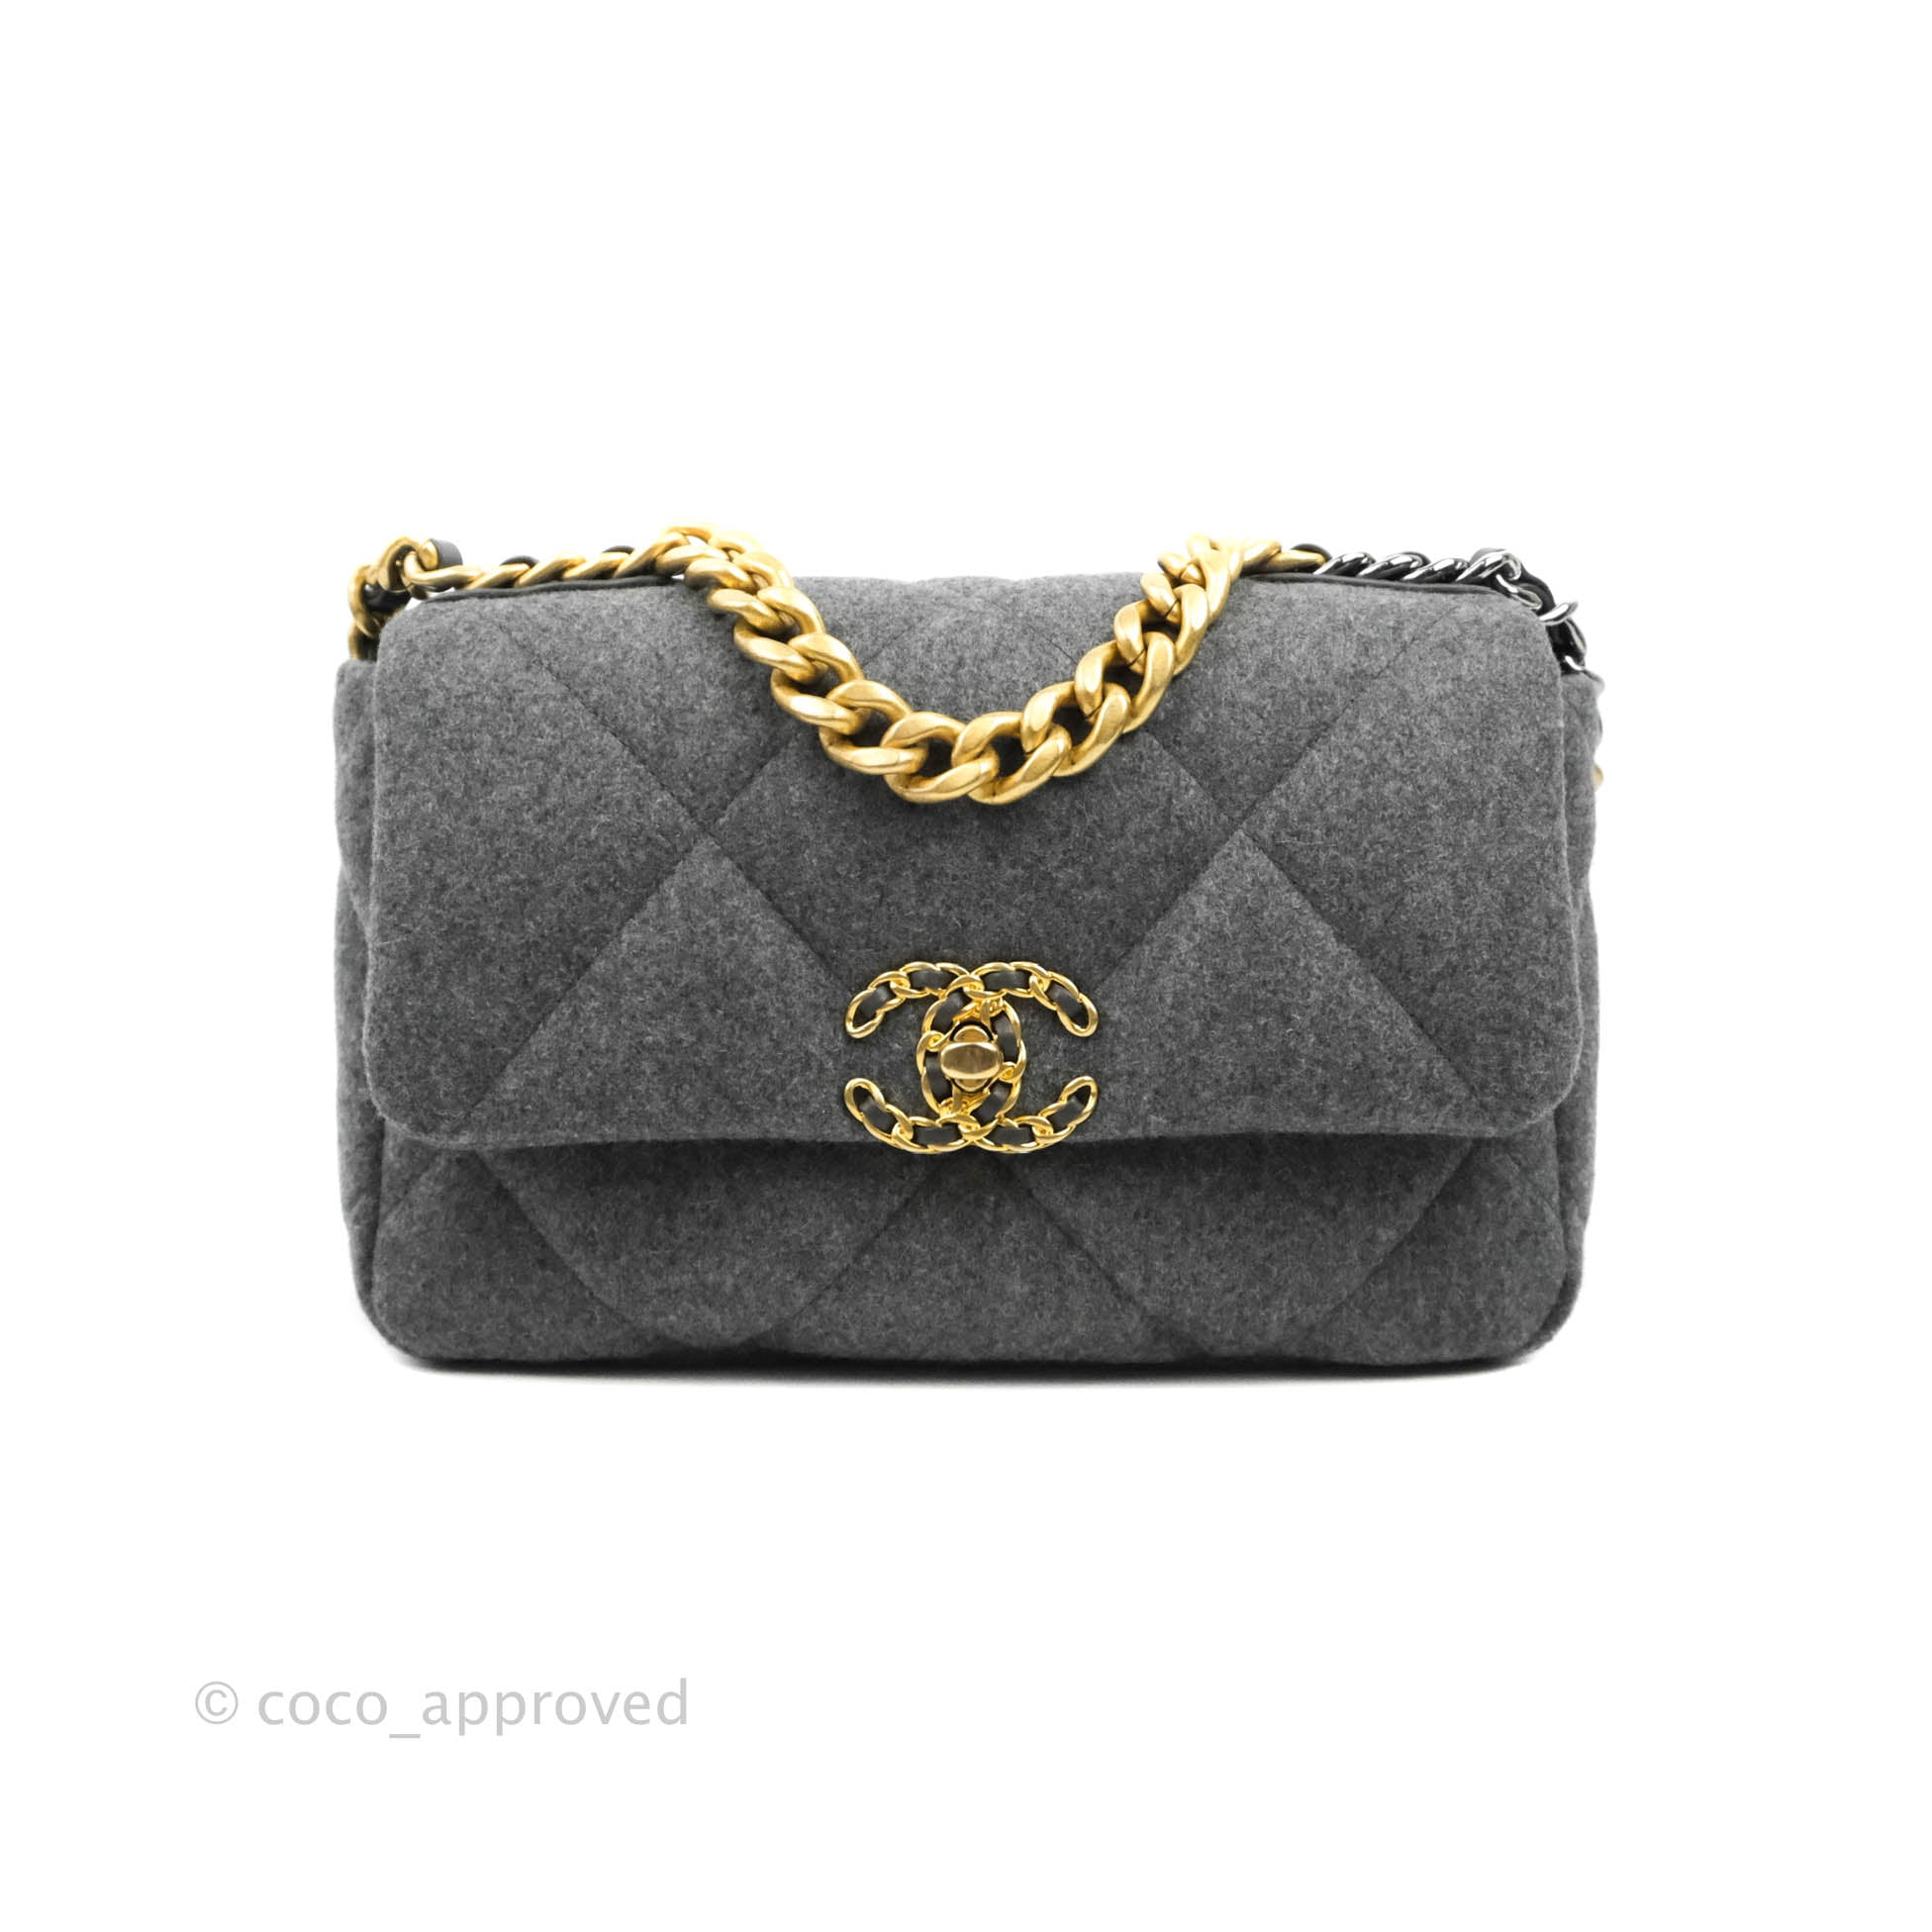 Chanel 19 Wallet on Chain, Gray Knit Tweed, New in Dustbag WA001